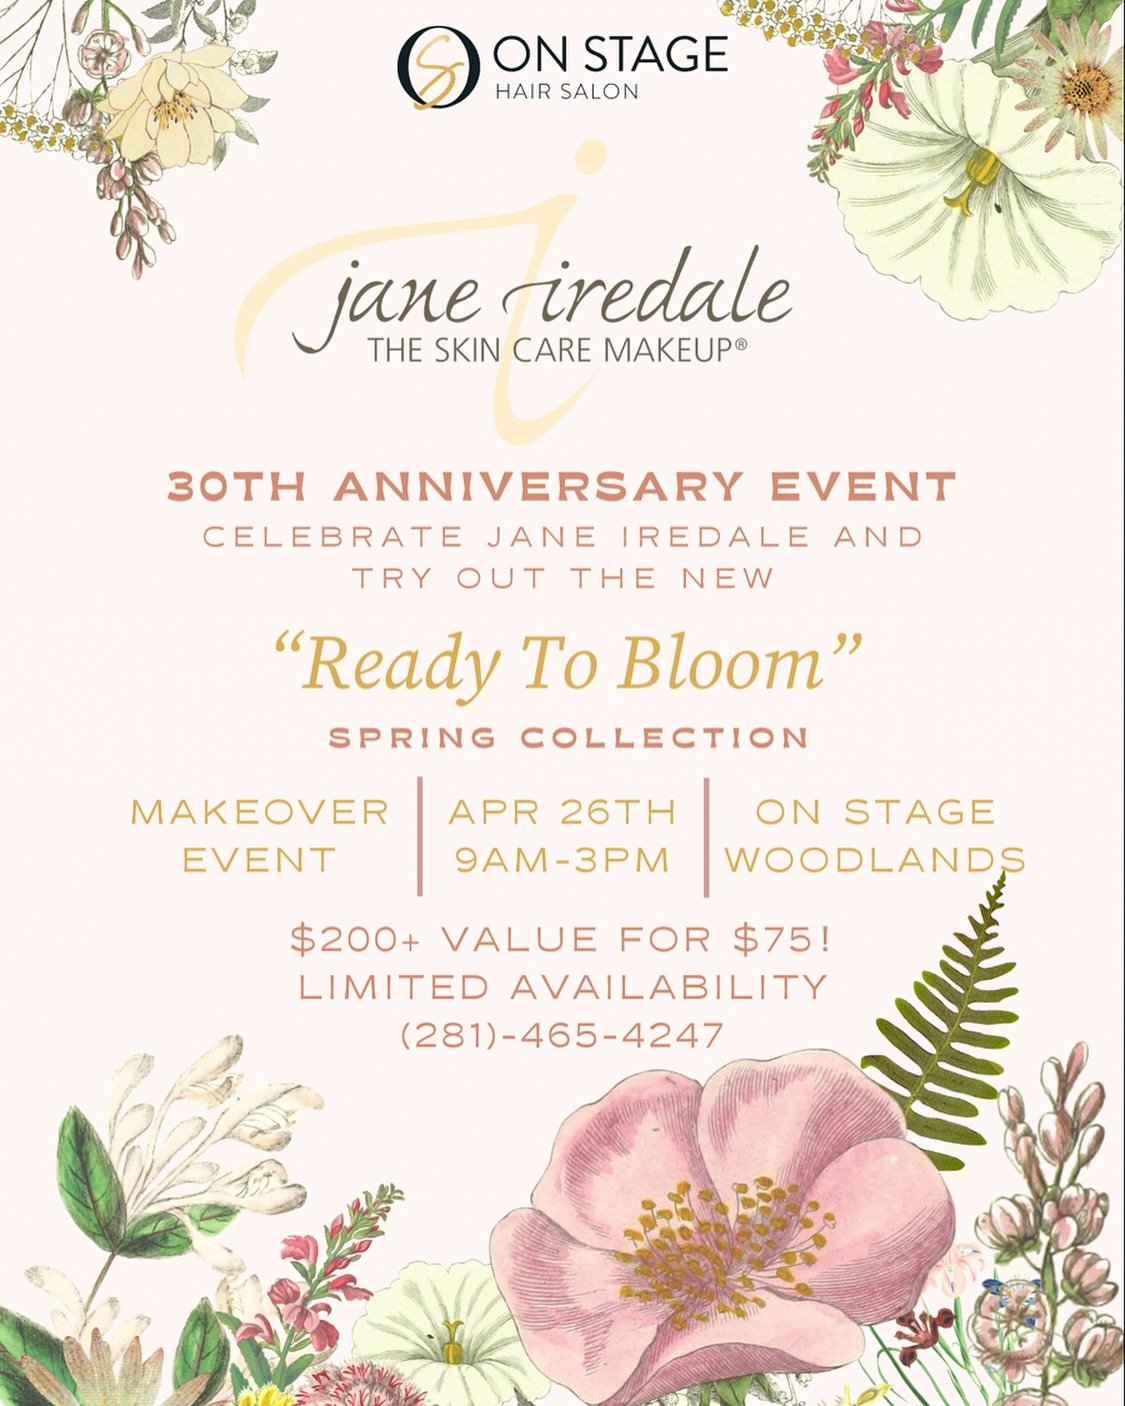 ONE WEEK UNTIL our Jane Iredale event where we will celebrate Jane&rsquo;s 30th anniversary and you will get to try out the brand new &ldquo;Ready to Bloom&rdquo; Spring Collection!🌷

The celebration will be a makeover event where you can take part 